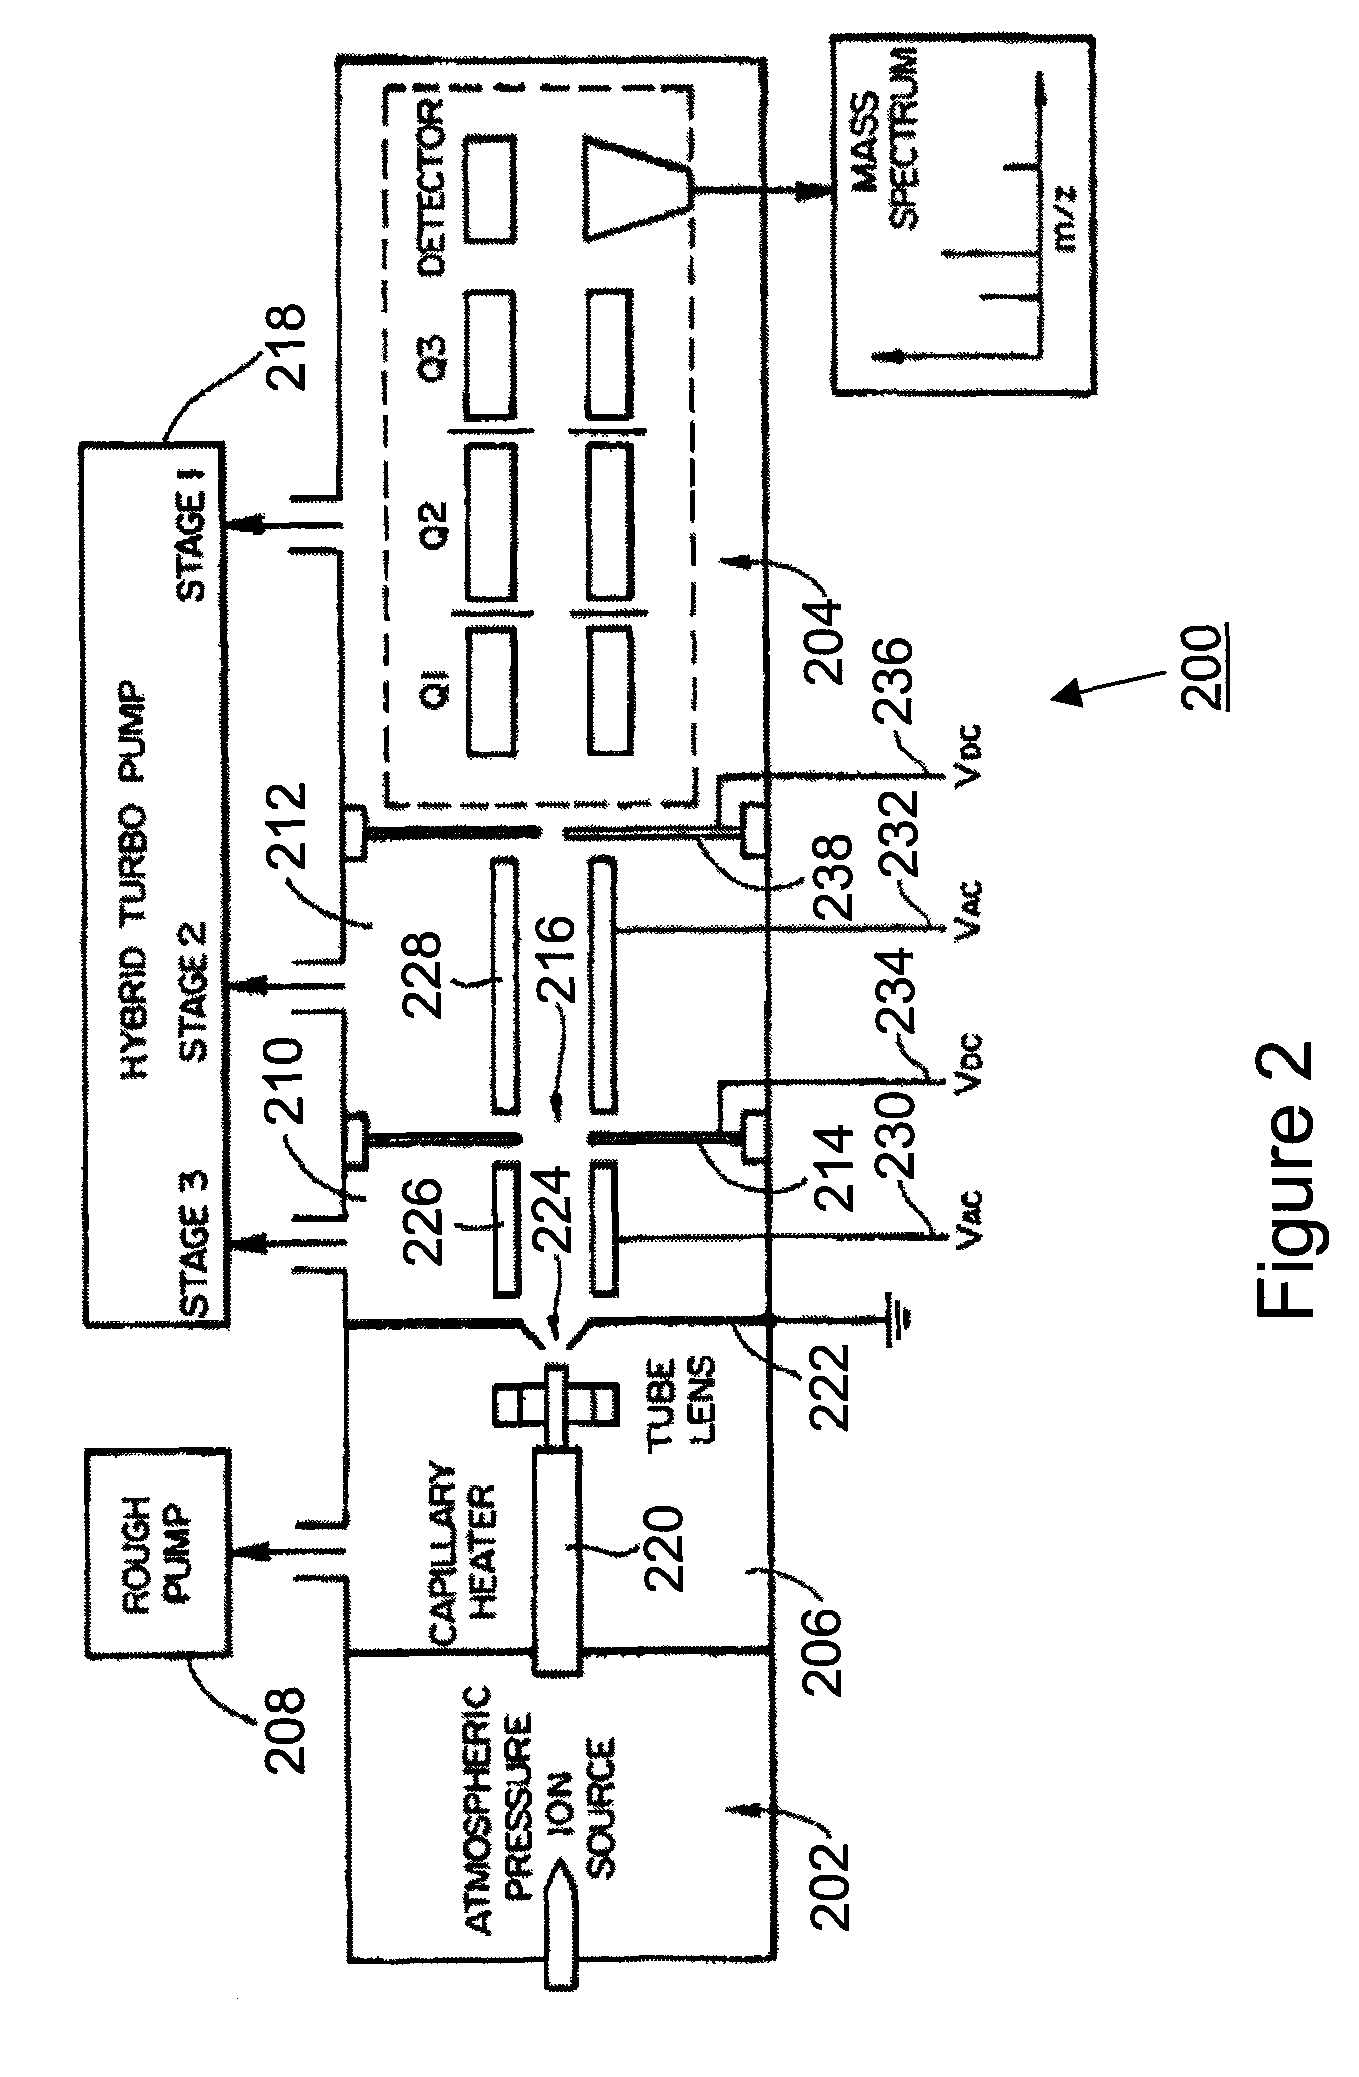 Method for identifying the elution time of an analyte